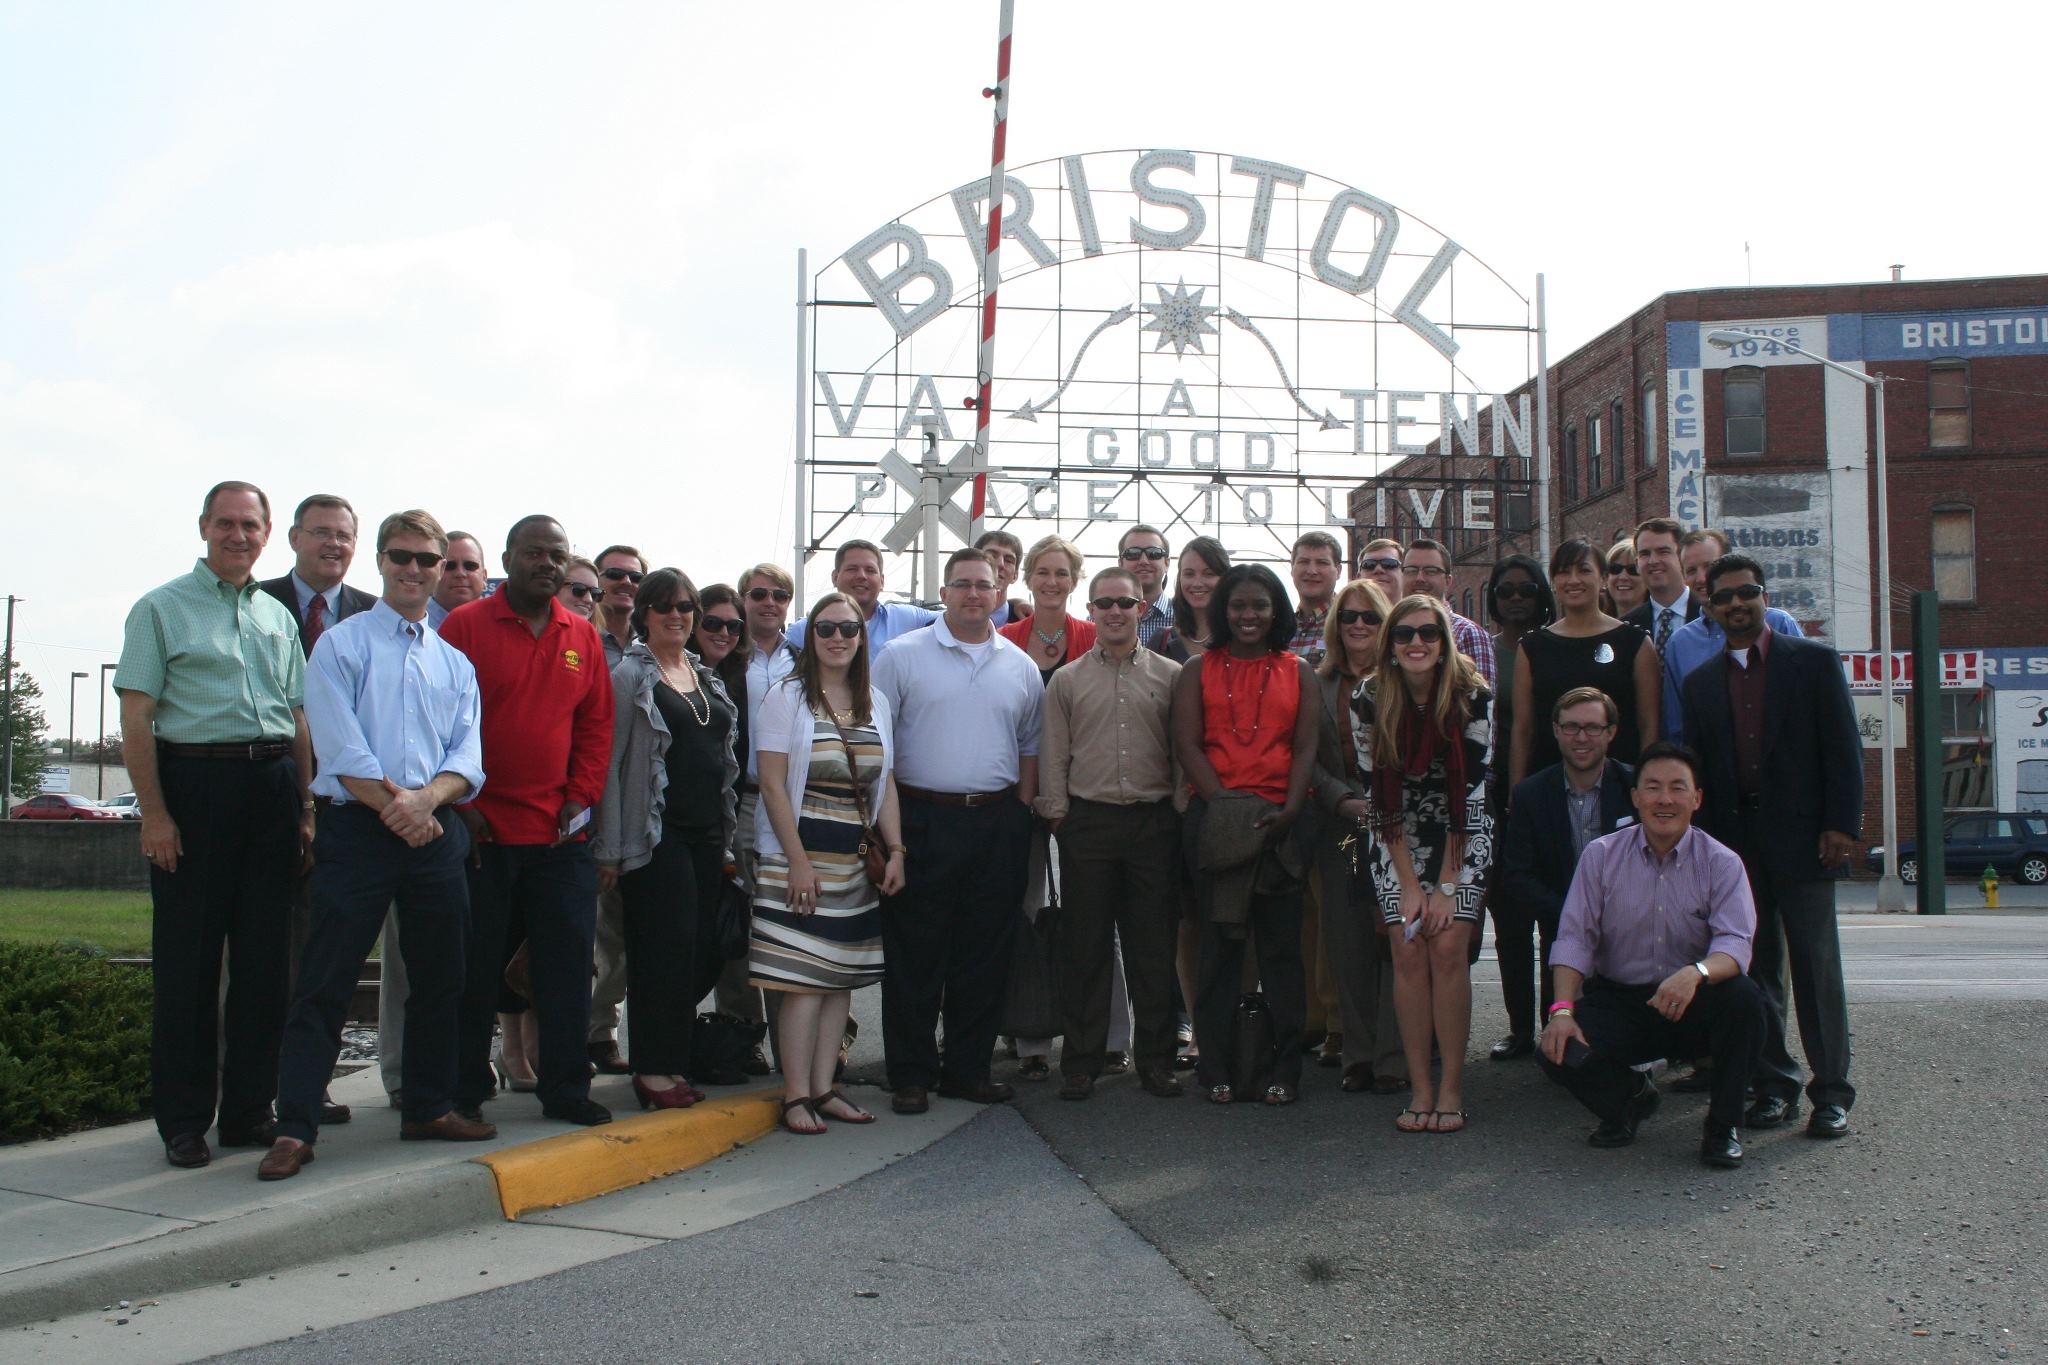 Group photo in front of a sign that says Bristol  va (arrow points right) Tenn (arrow points left)